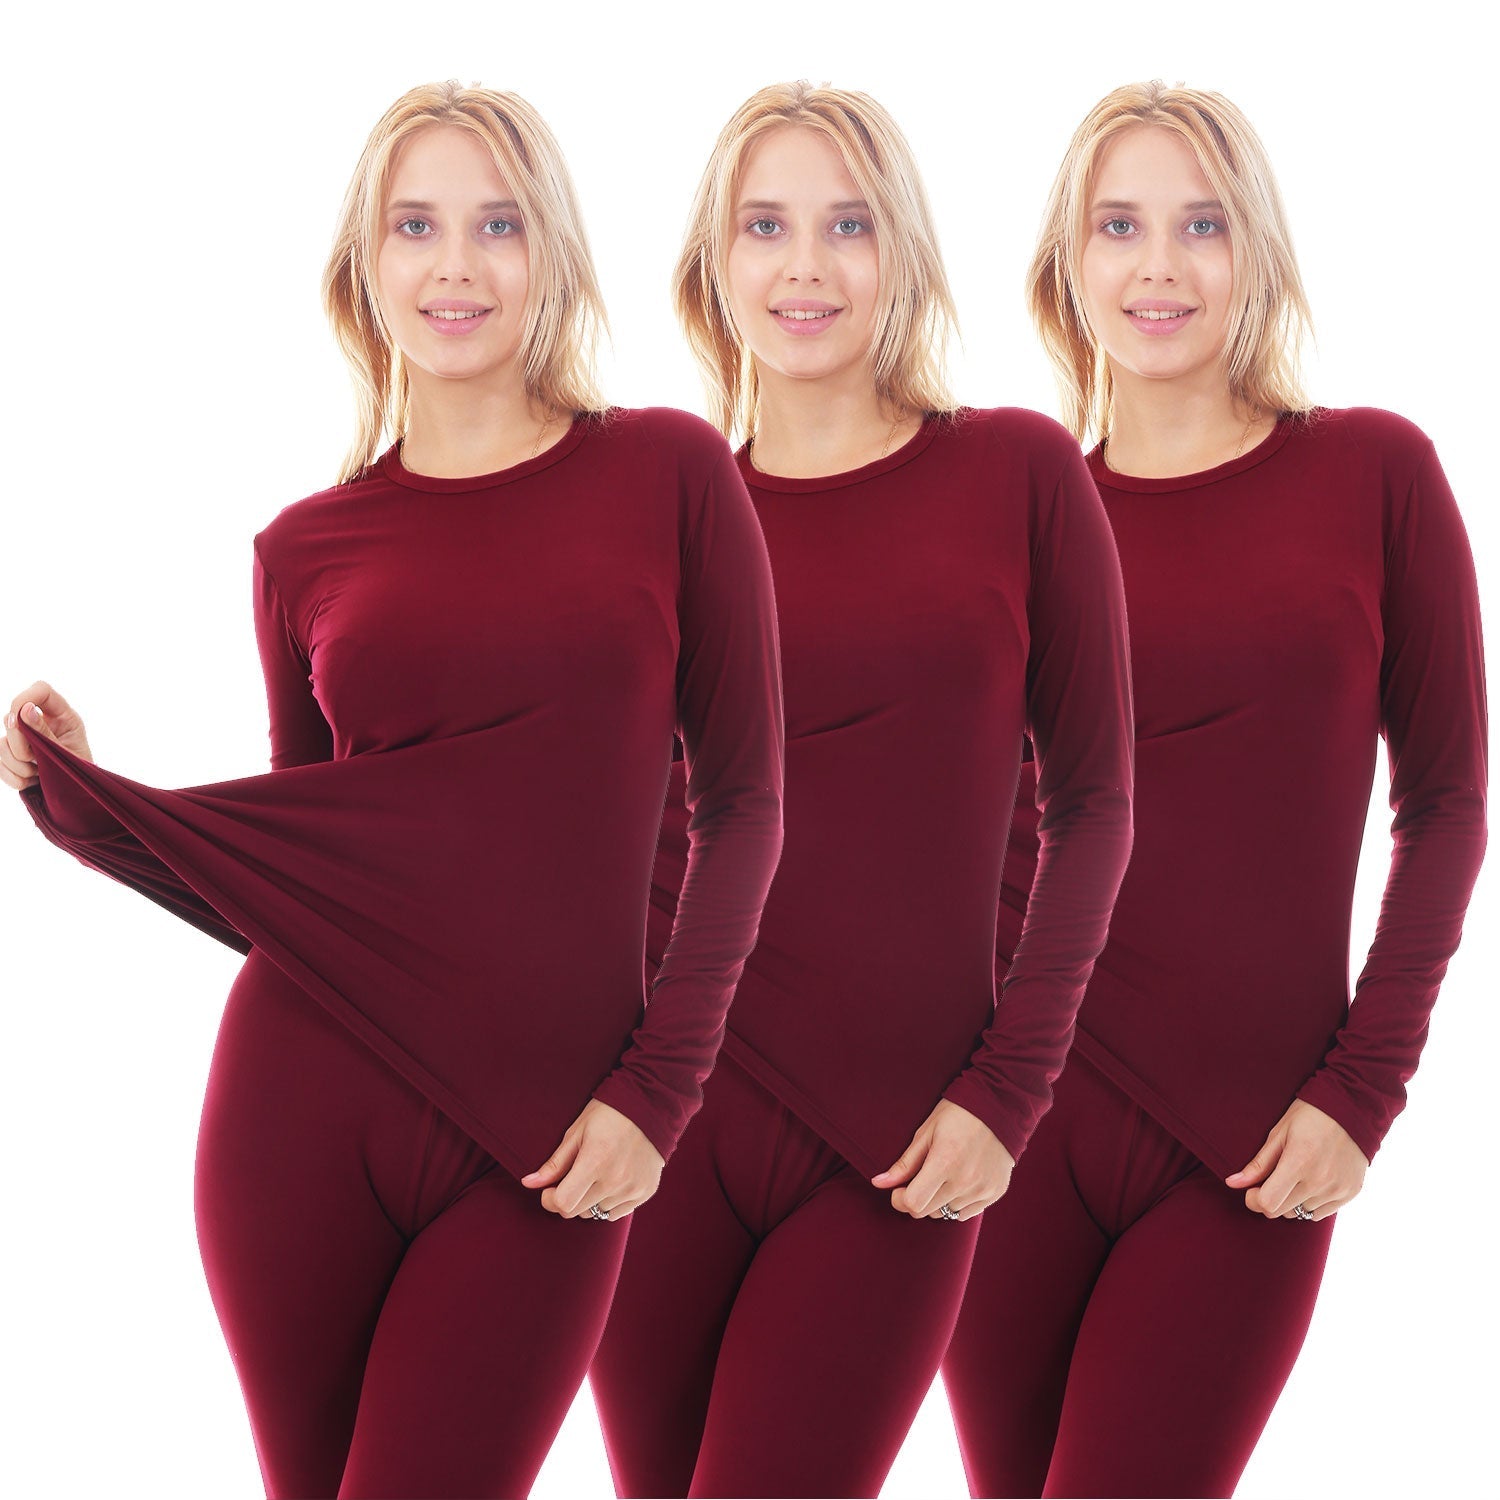 Fashion Long Johns For Women Thermal Underwear Warm Shirt Intimate Sets